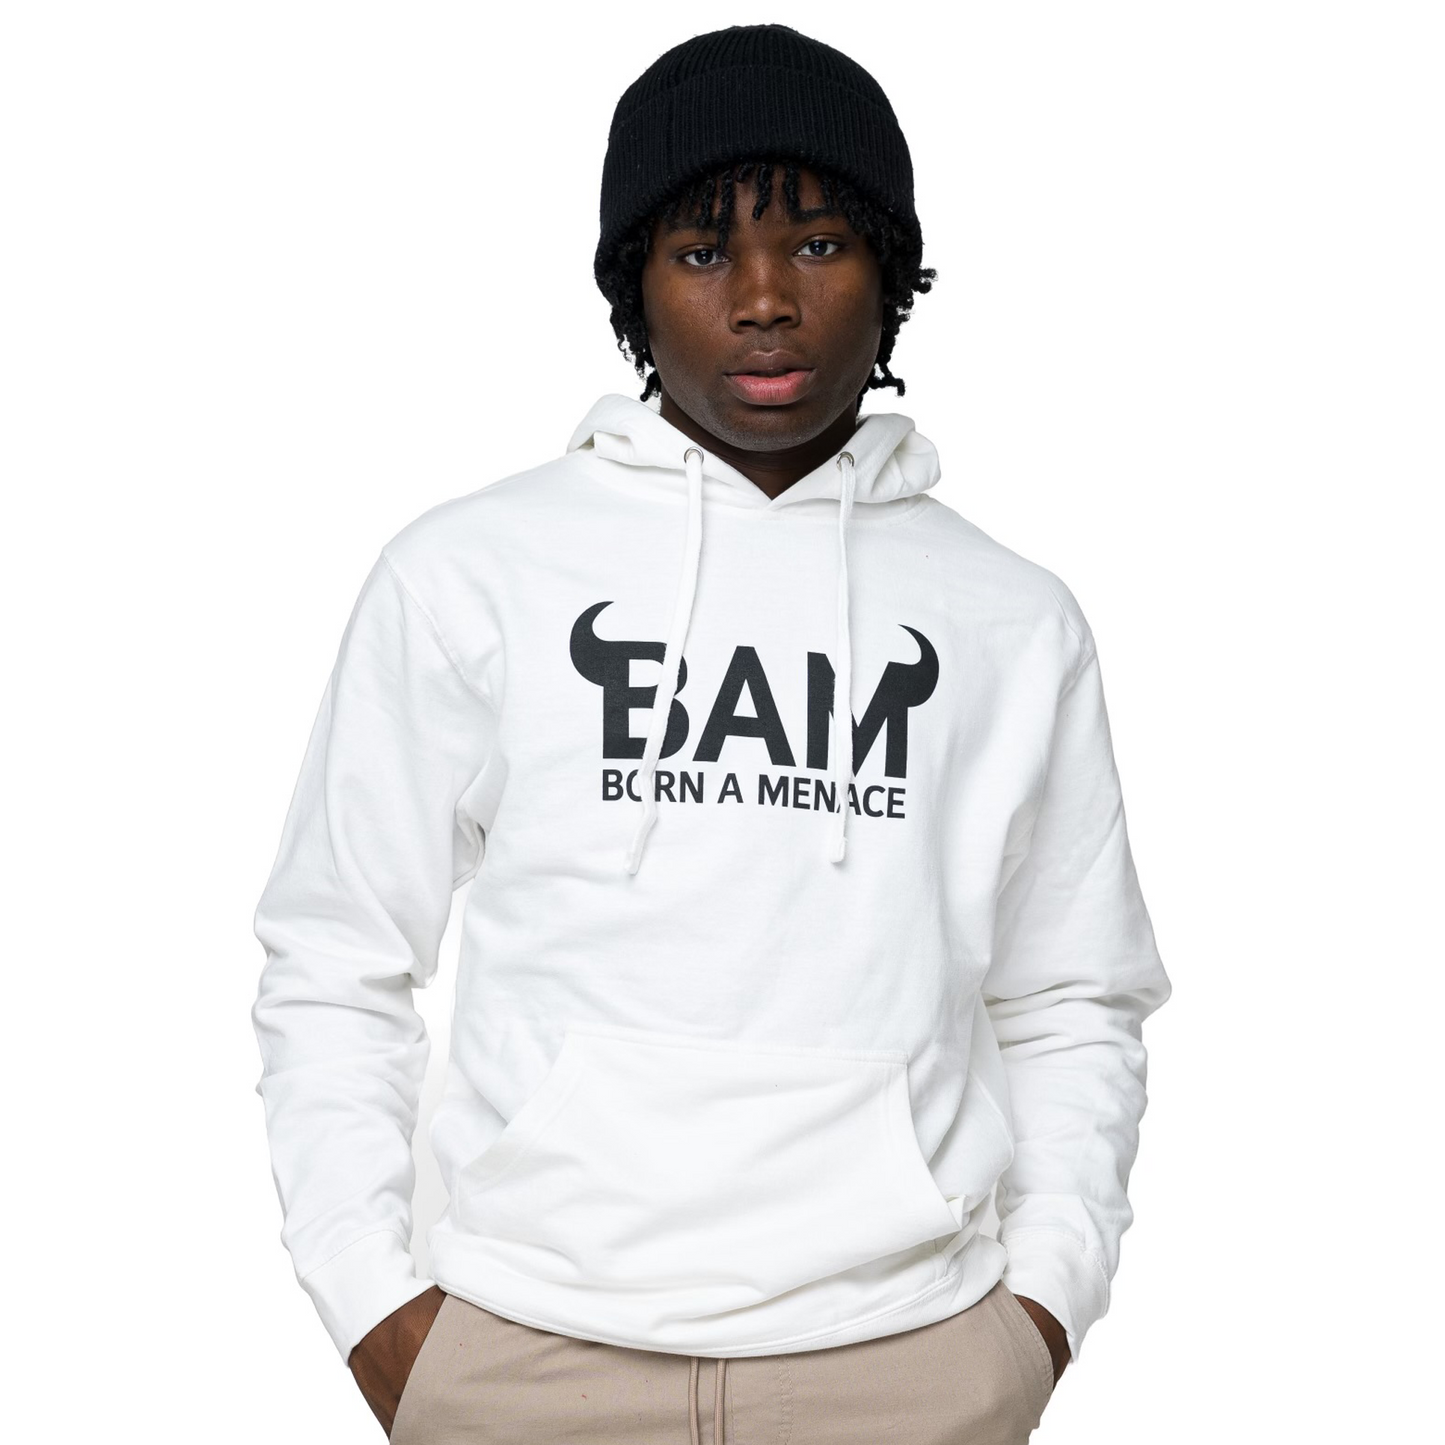 Born a Menace White Hoodie (Limited)